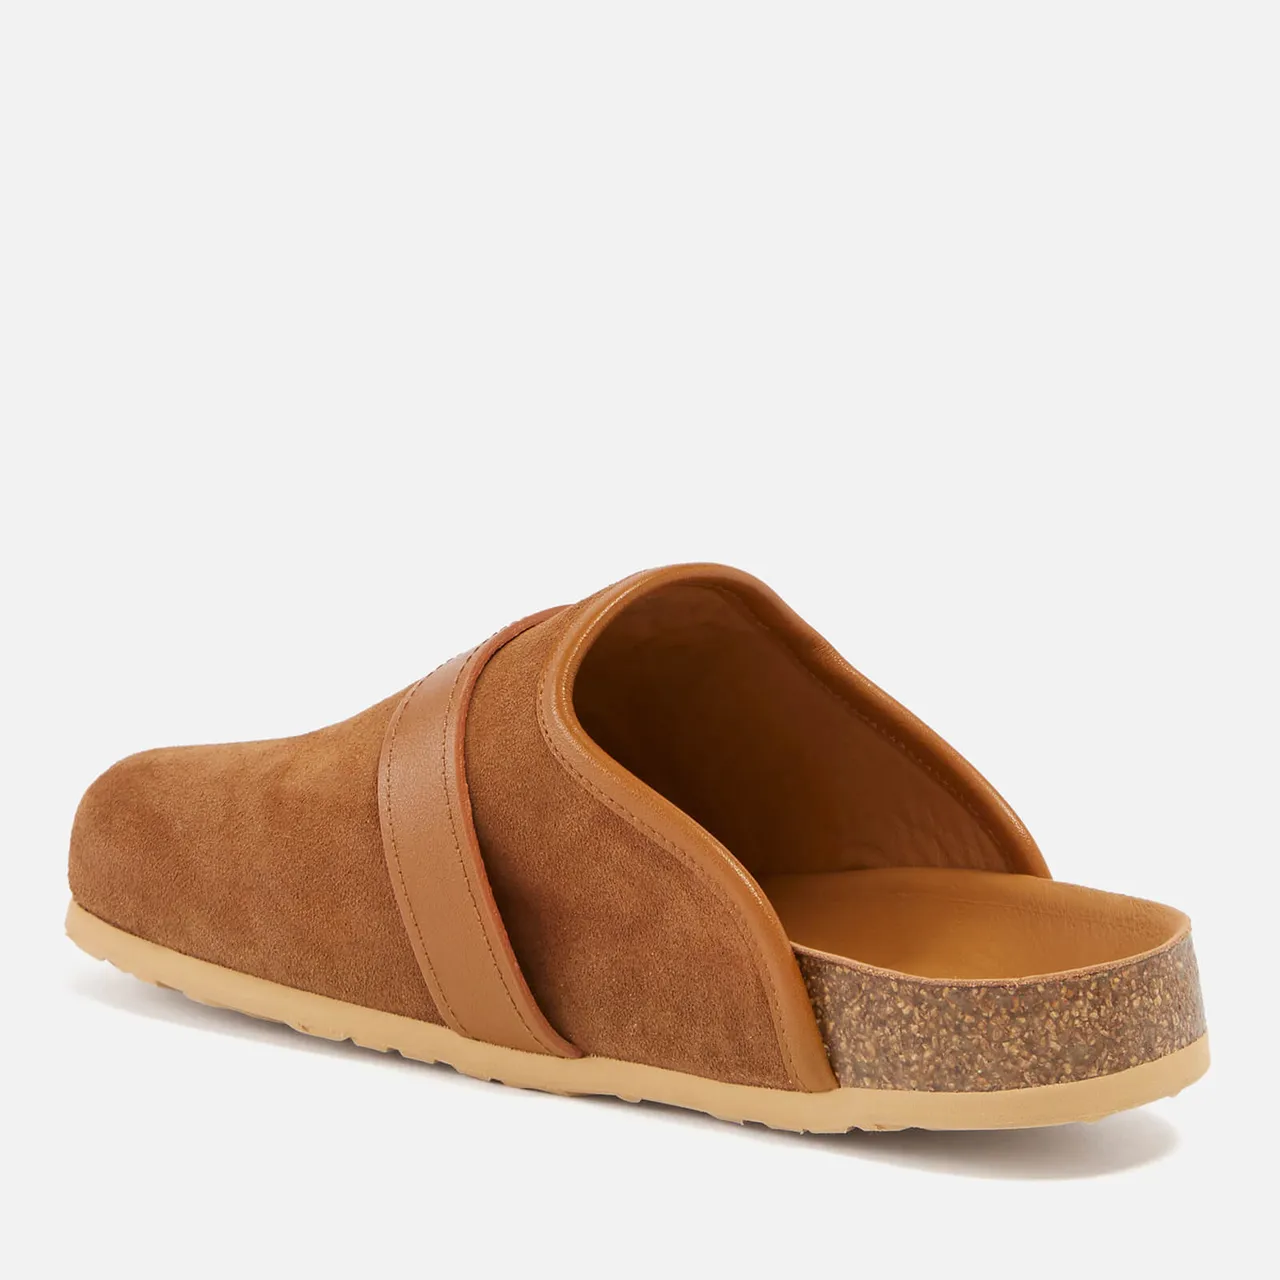 See by Chloé Women’s Chany Fussbelt Suede Mules - UK